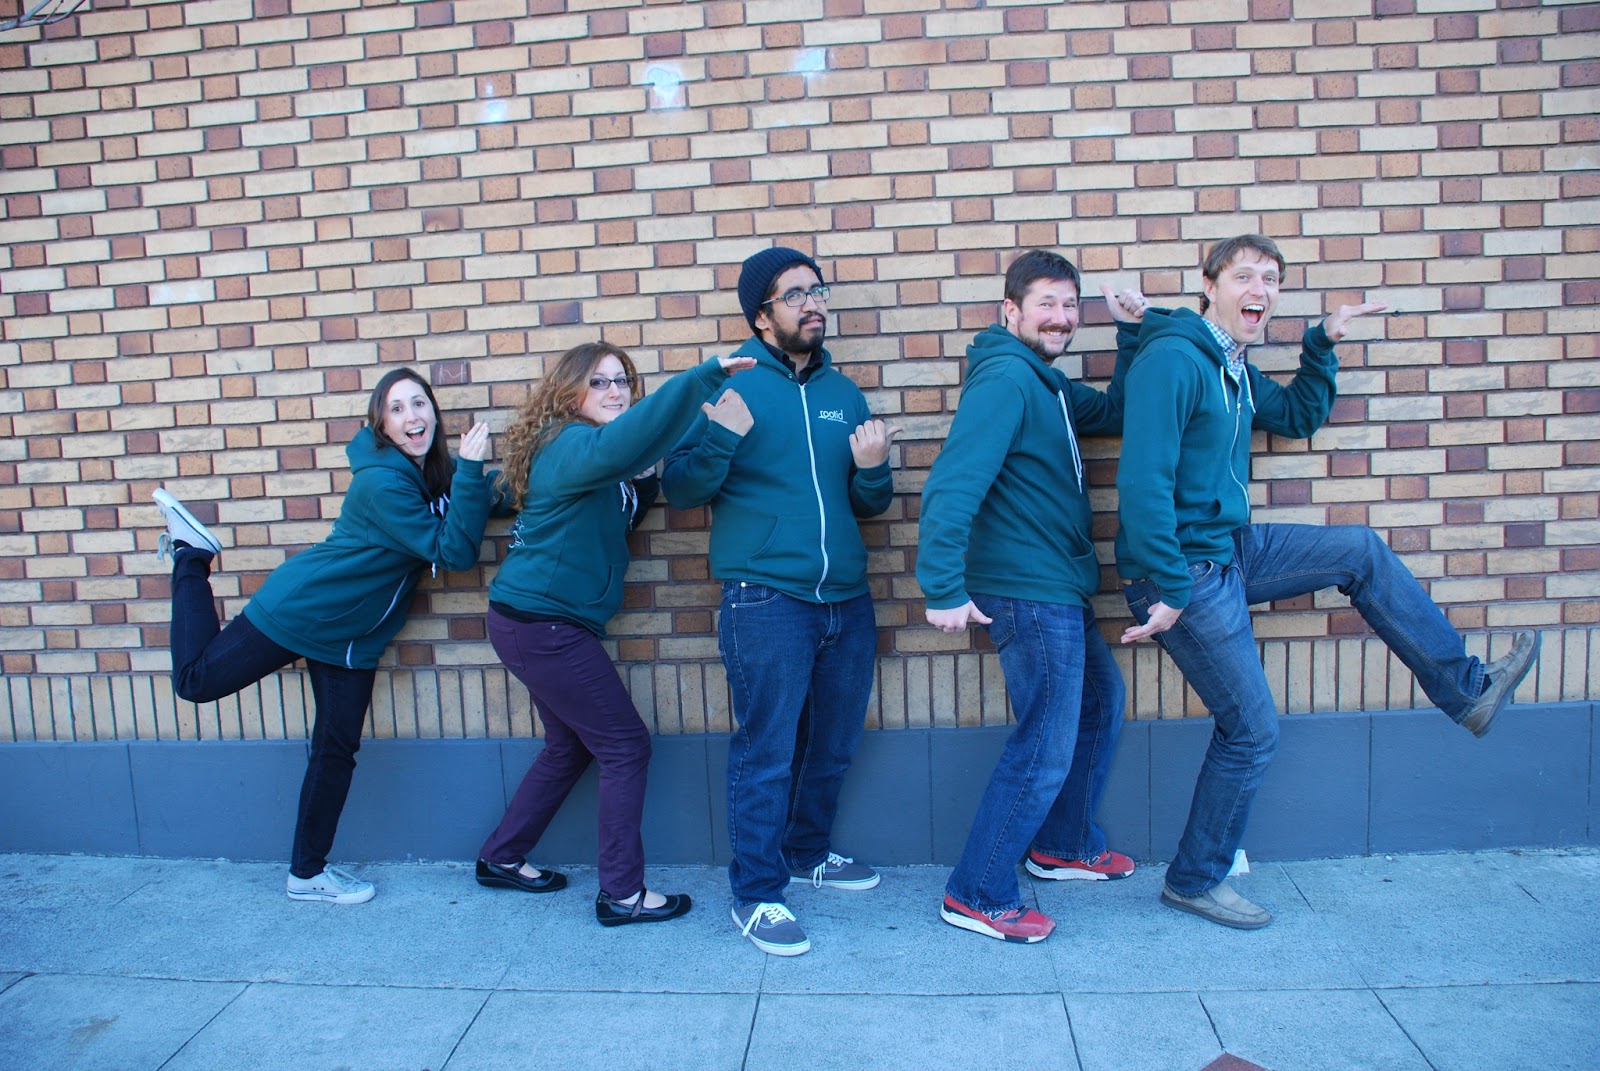 5 people in green hoodies posing silly against a brick wall